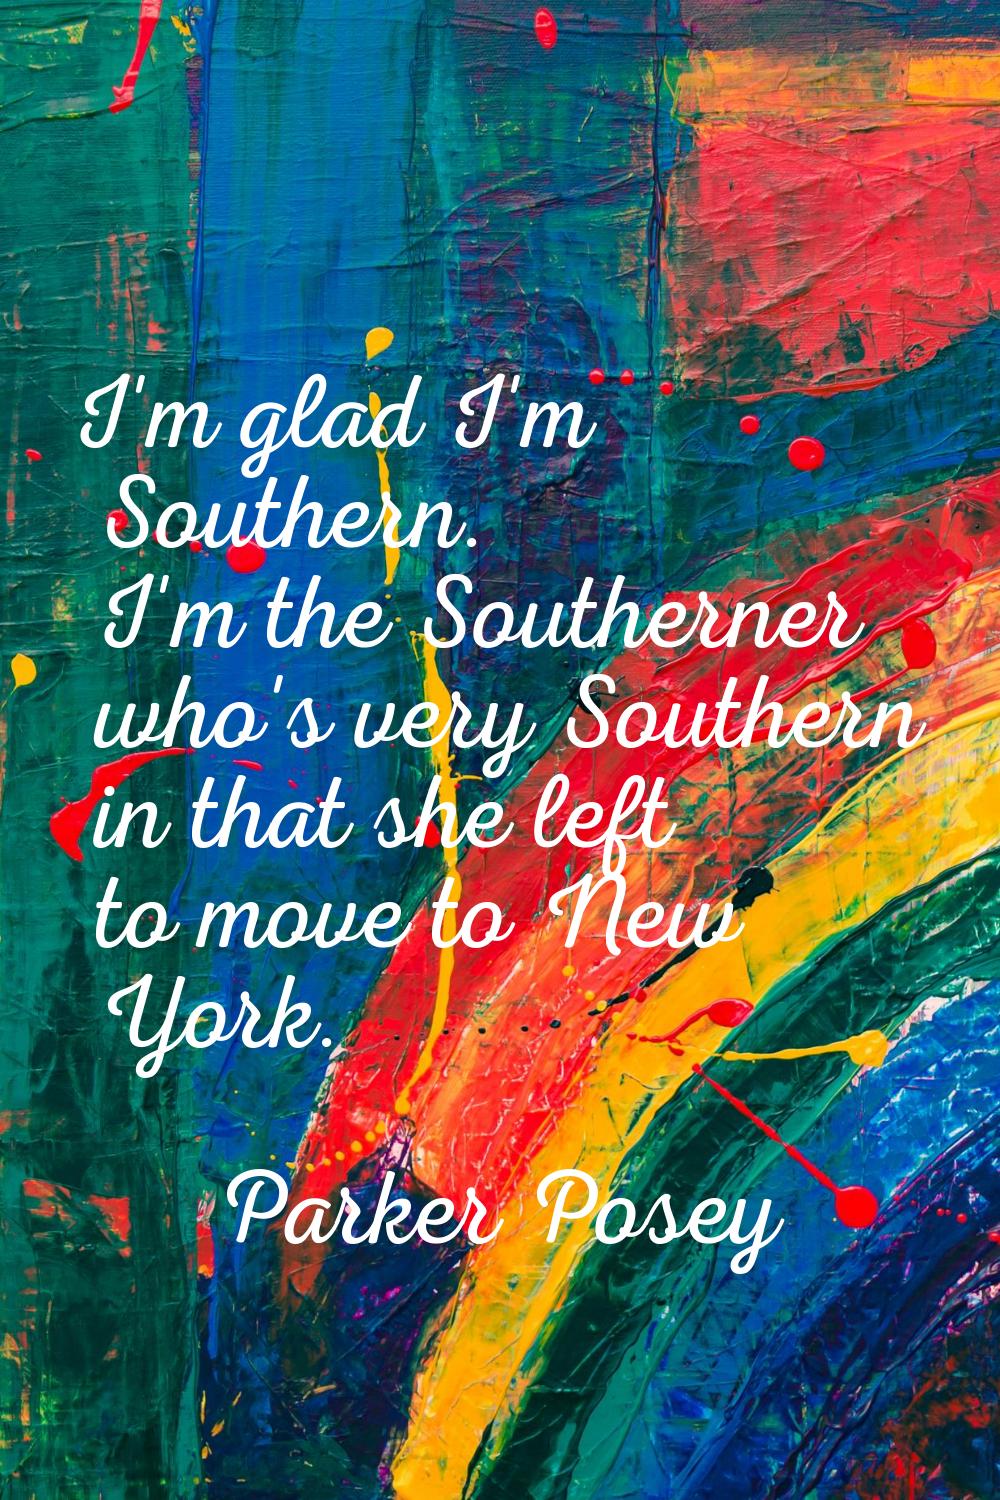 I'm glad I'm Southern. I'm the Southerner who's very Southern in that she left to move to New York.